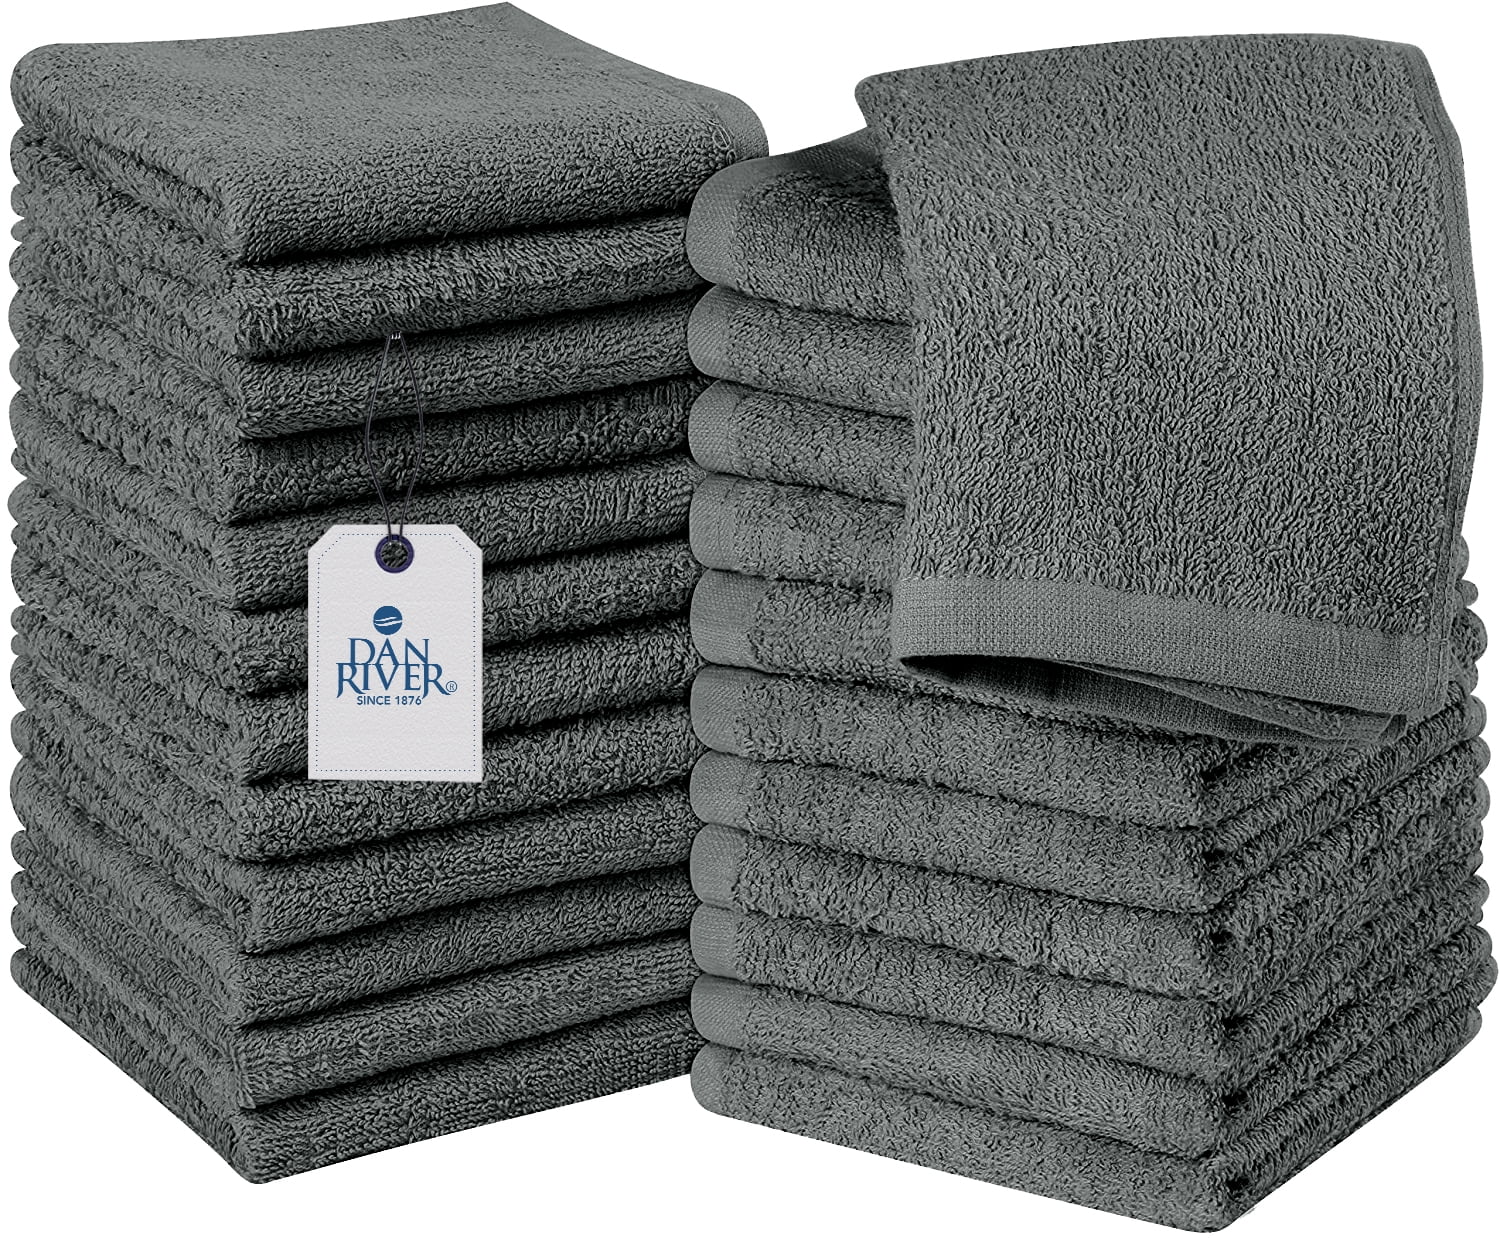 Dan River 100% Cotton Washcloths 24 Pack High-Quality Face and Body Cloth | Towels for Bathroom, Hand, Kitchen, Cleaning | 12x12 In | 400 GSM (Gray)